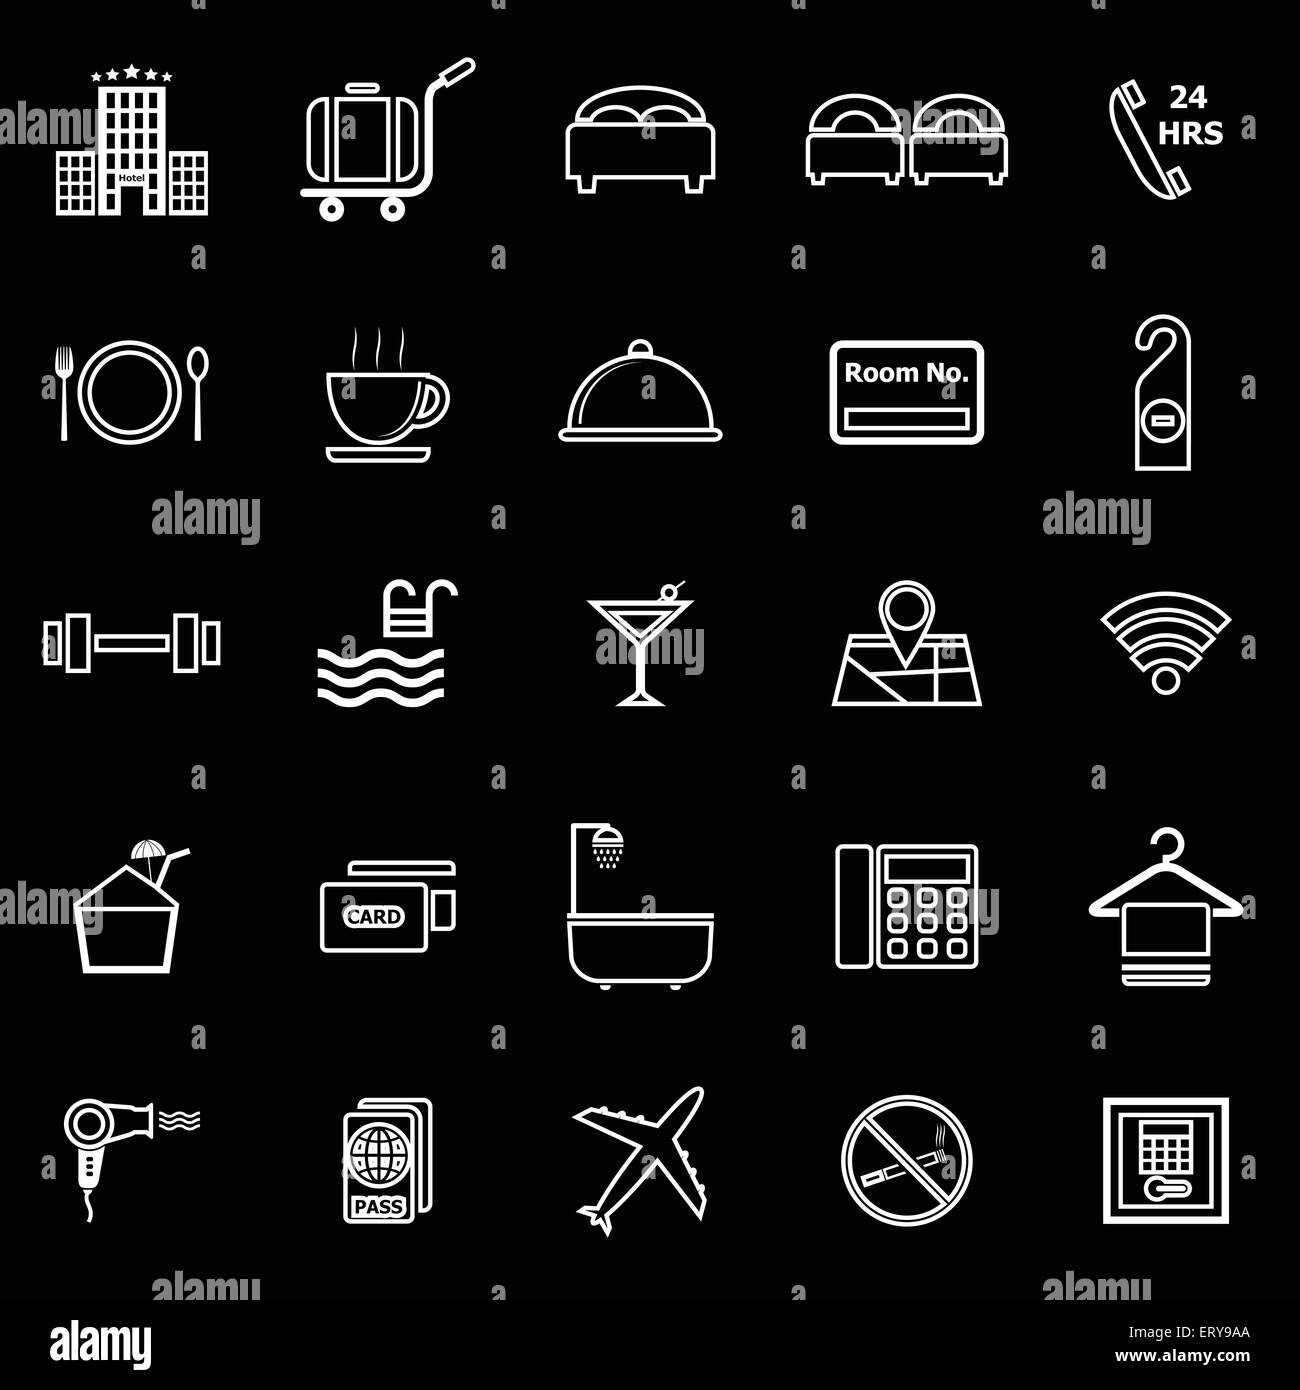 Hotel line icons on black background, stock vector Stock Vector